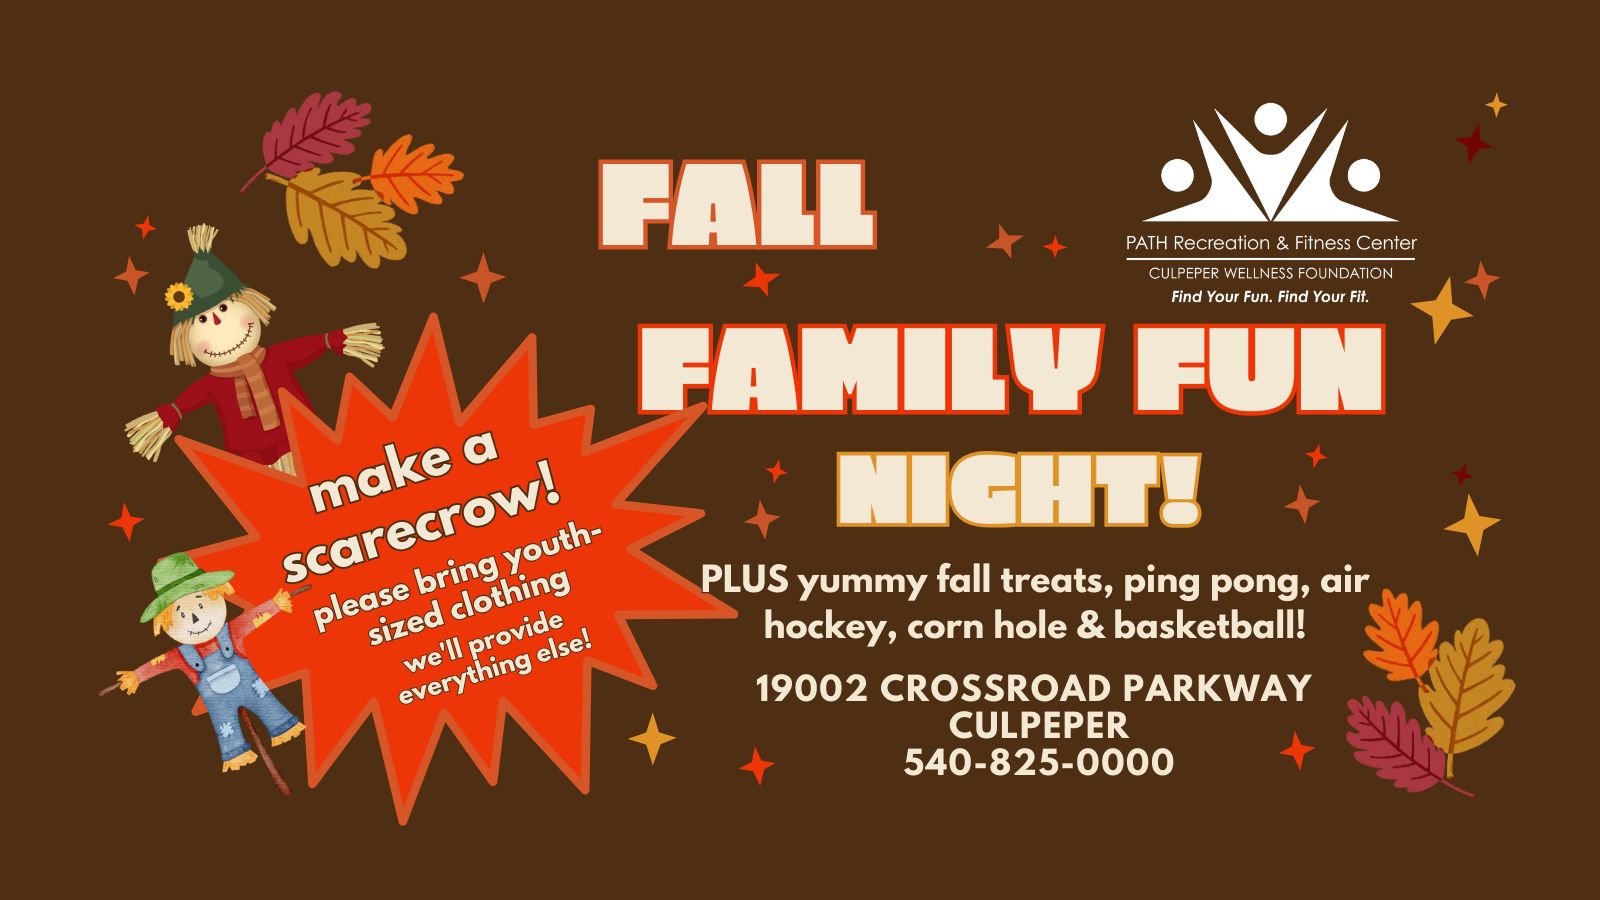 Fall Family Fun Night at PATH Recreation & Fitness Center Image